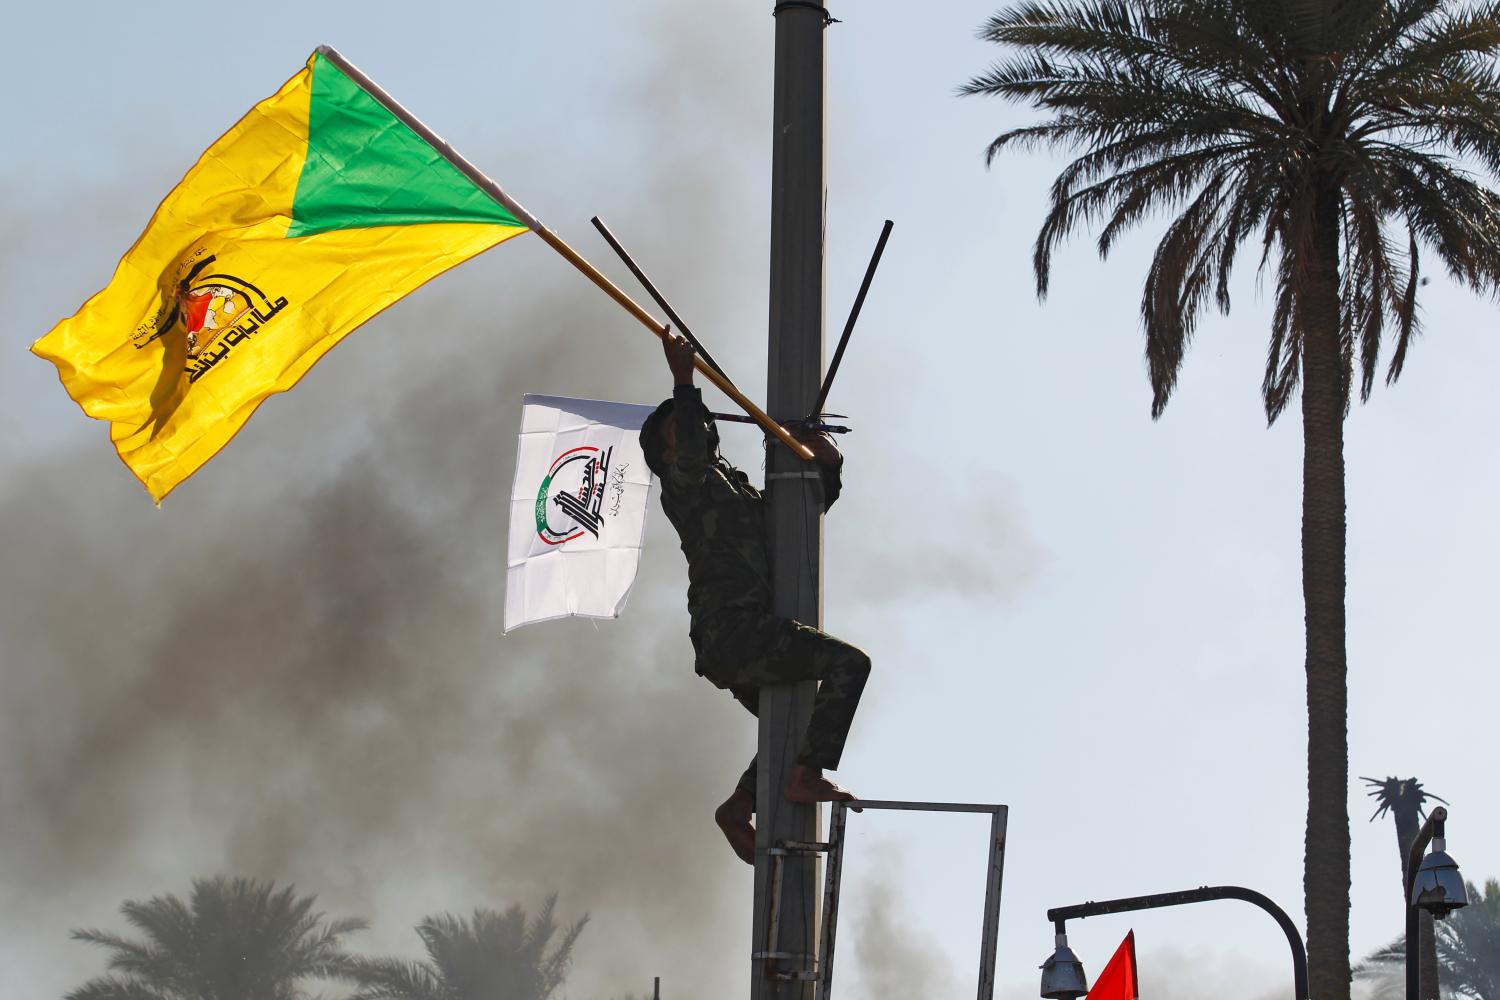 A member of Hashd al-Shaabi (paramilitary forces) holds a flag of Kataib Hezbollah militia group during a protest to condemn air strikes on their bases, in Baghdad, Iraq December 31, 2019. REUTERS/Khalid al-Mousily